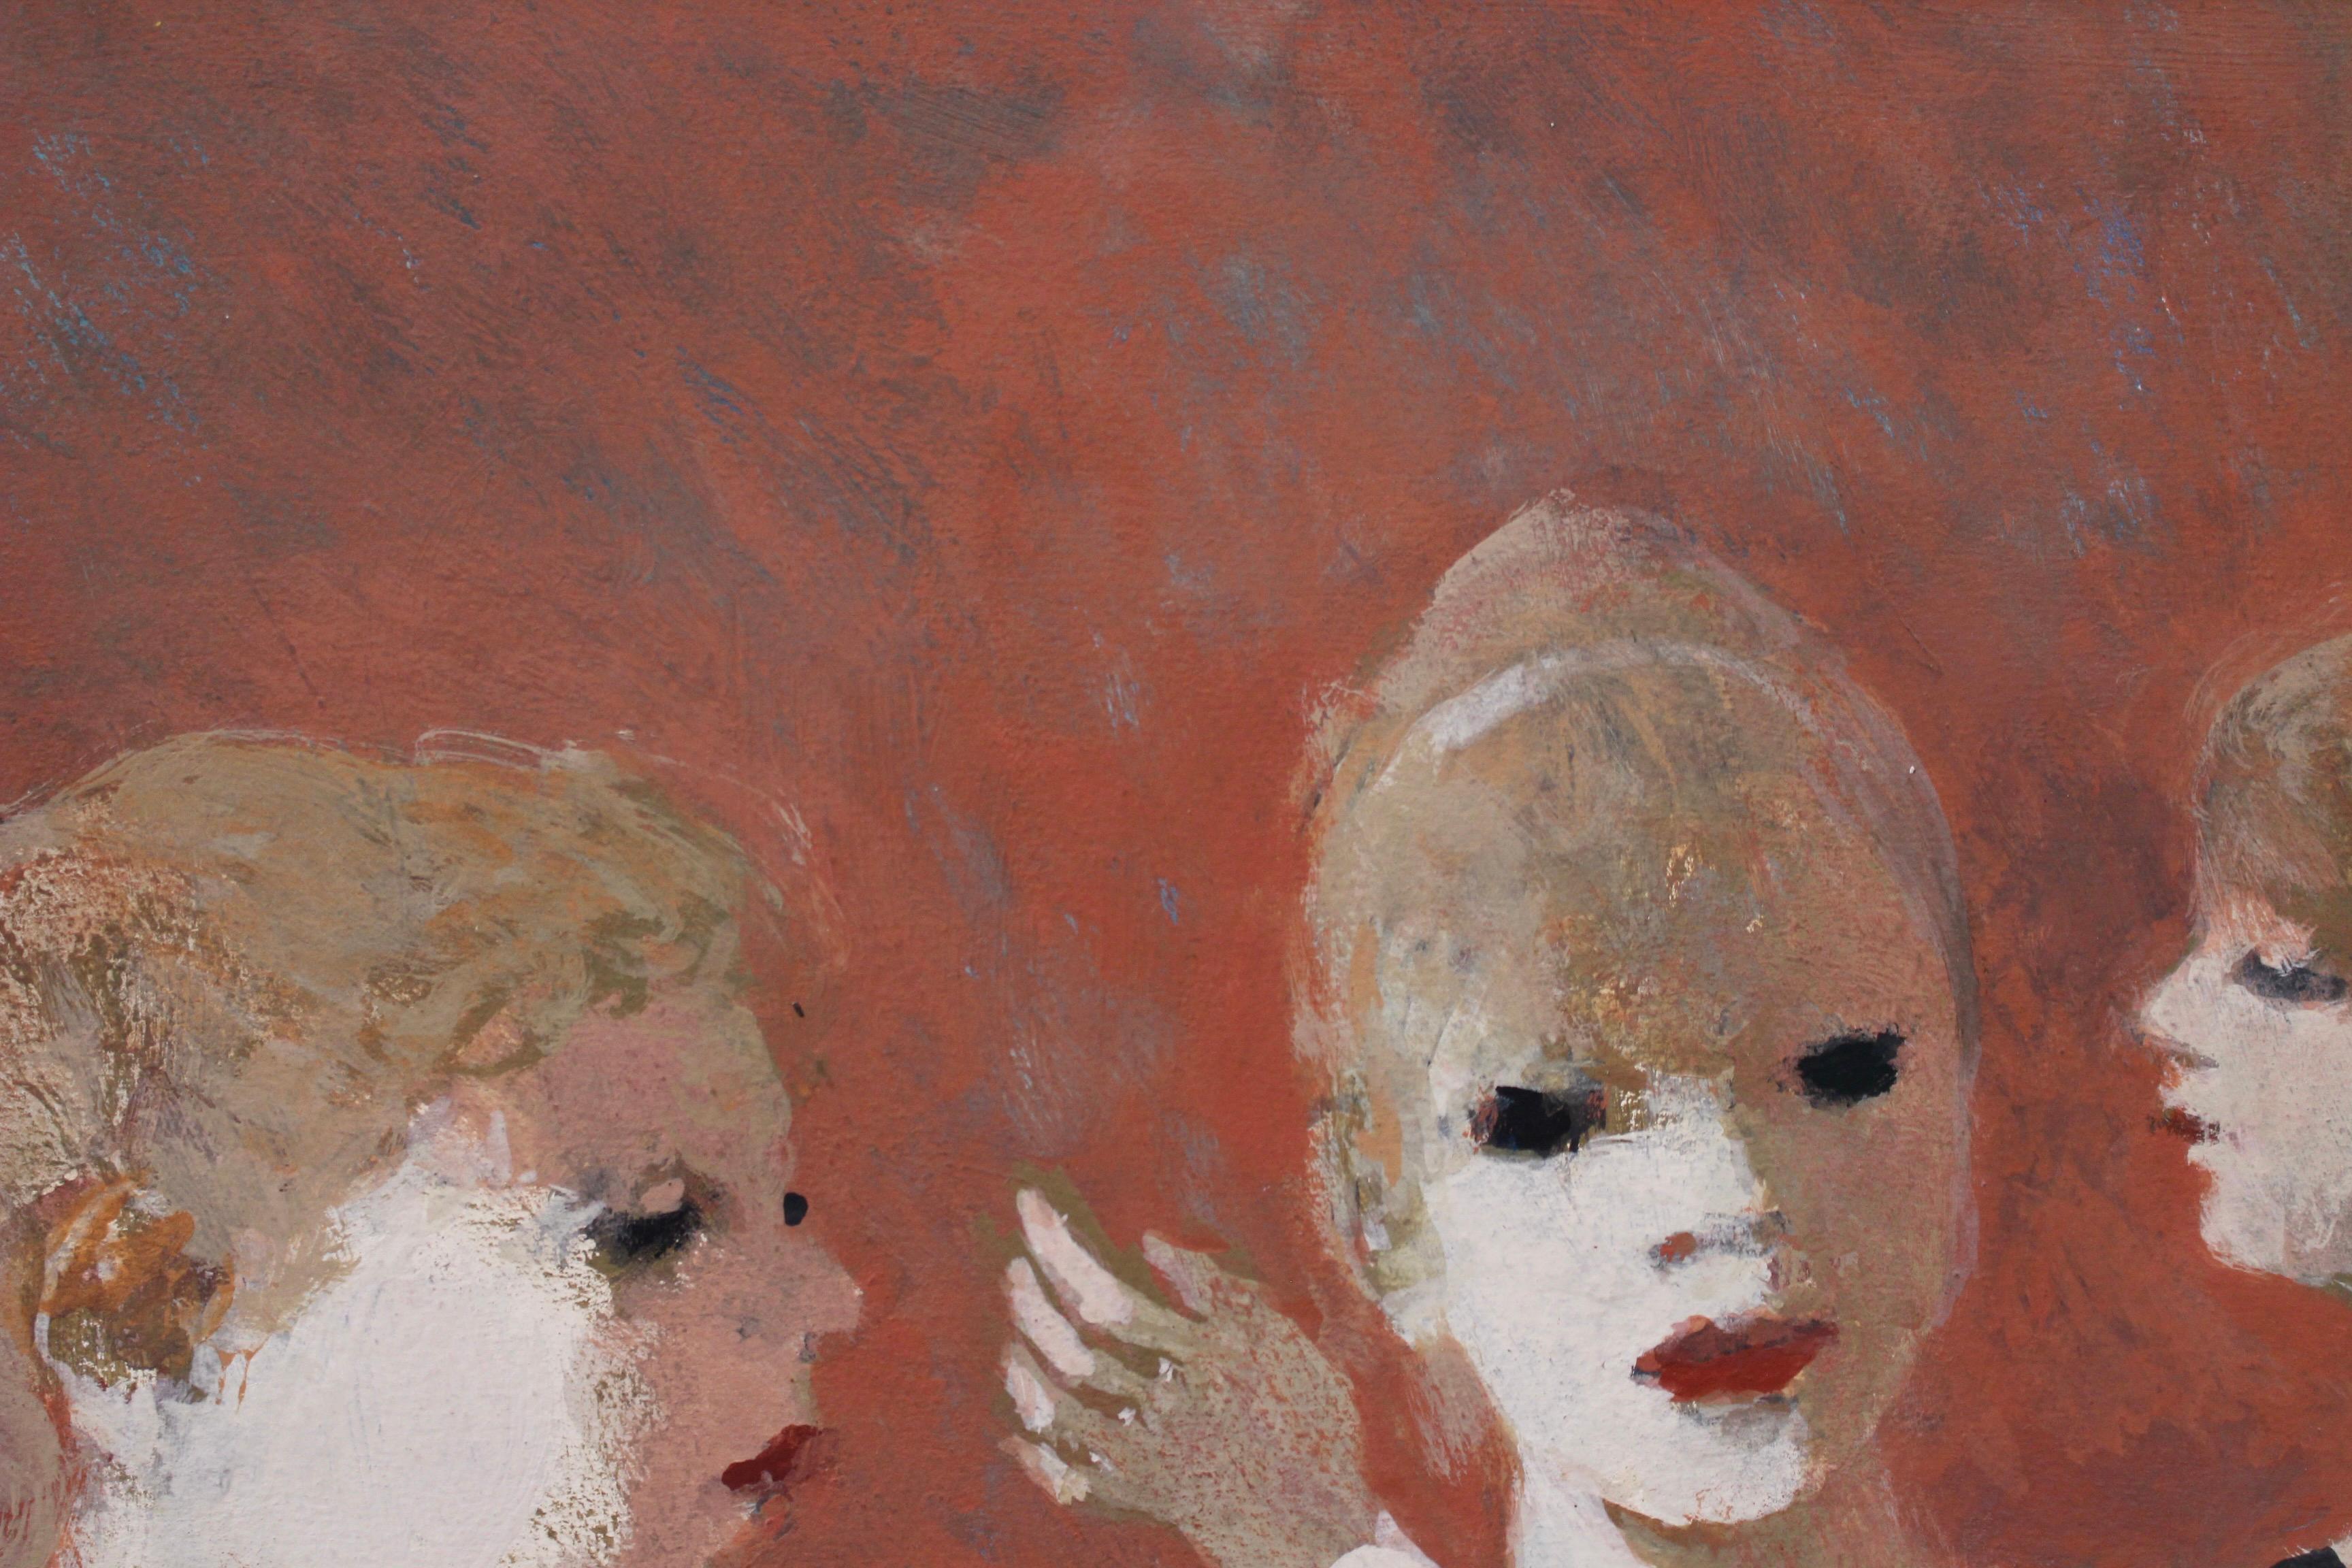 'Rehearsal at the Paris Opera House', gouache on art paper, by Maurice Le Nestour (circa 1970s). Like Degas, Le Nestour found a world that excited both his taste for classical beauty and his eye for modern realism. His technique of layered gouache